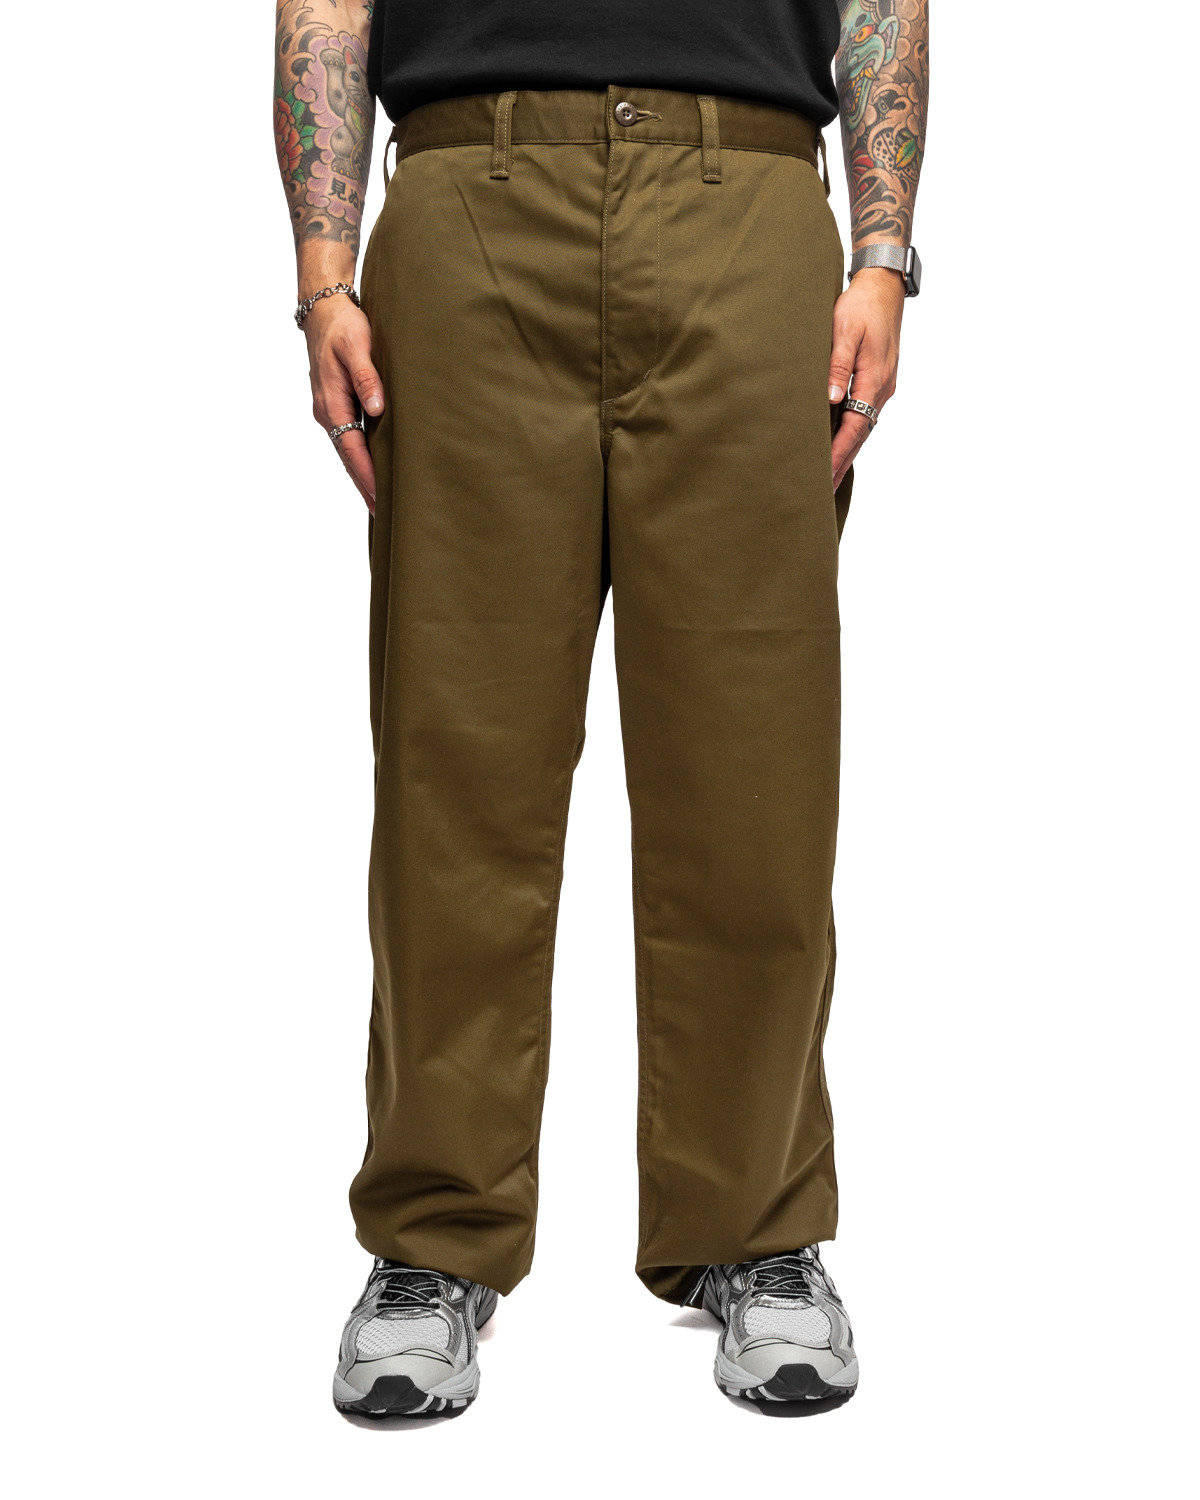 Trousers 05 Olive Drab - 1